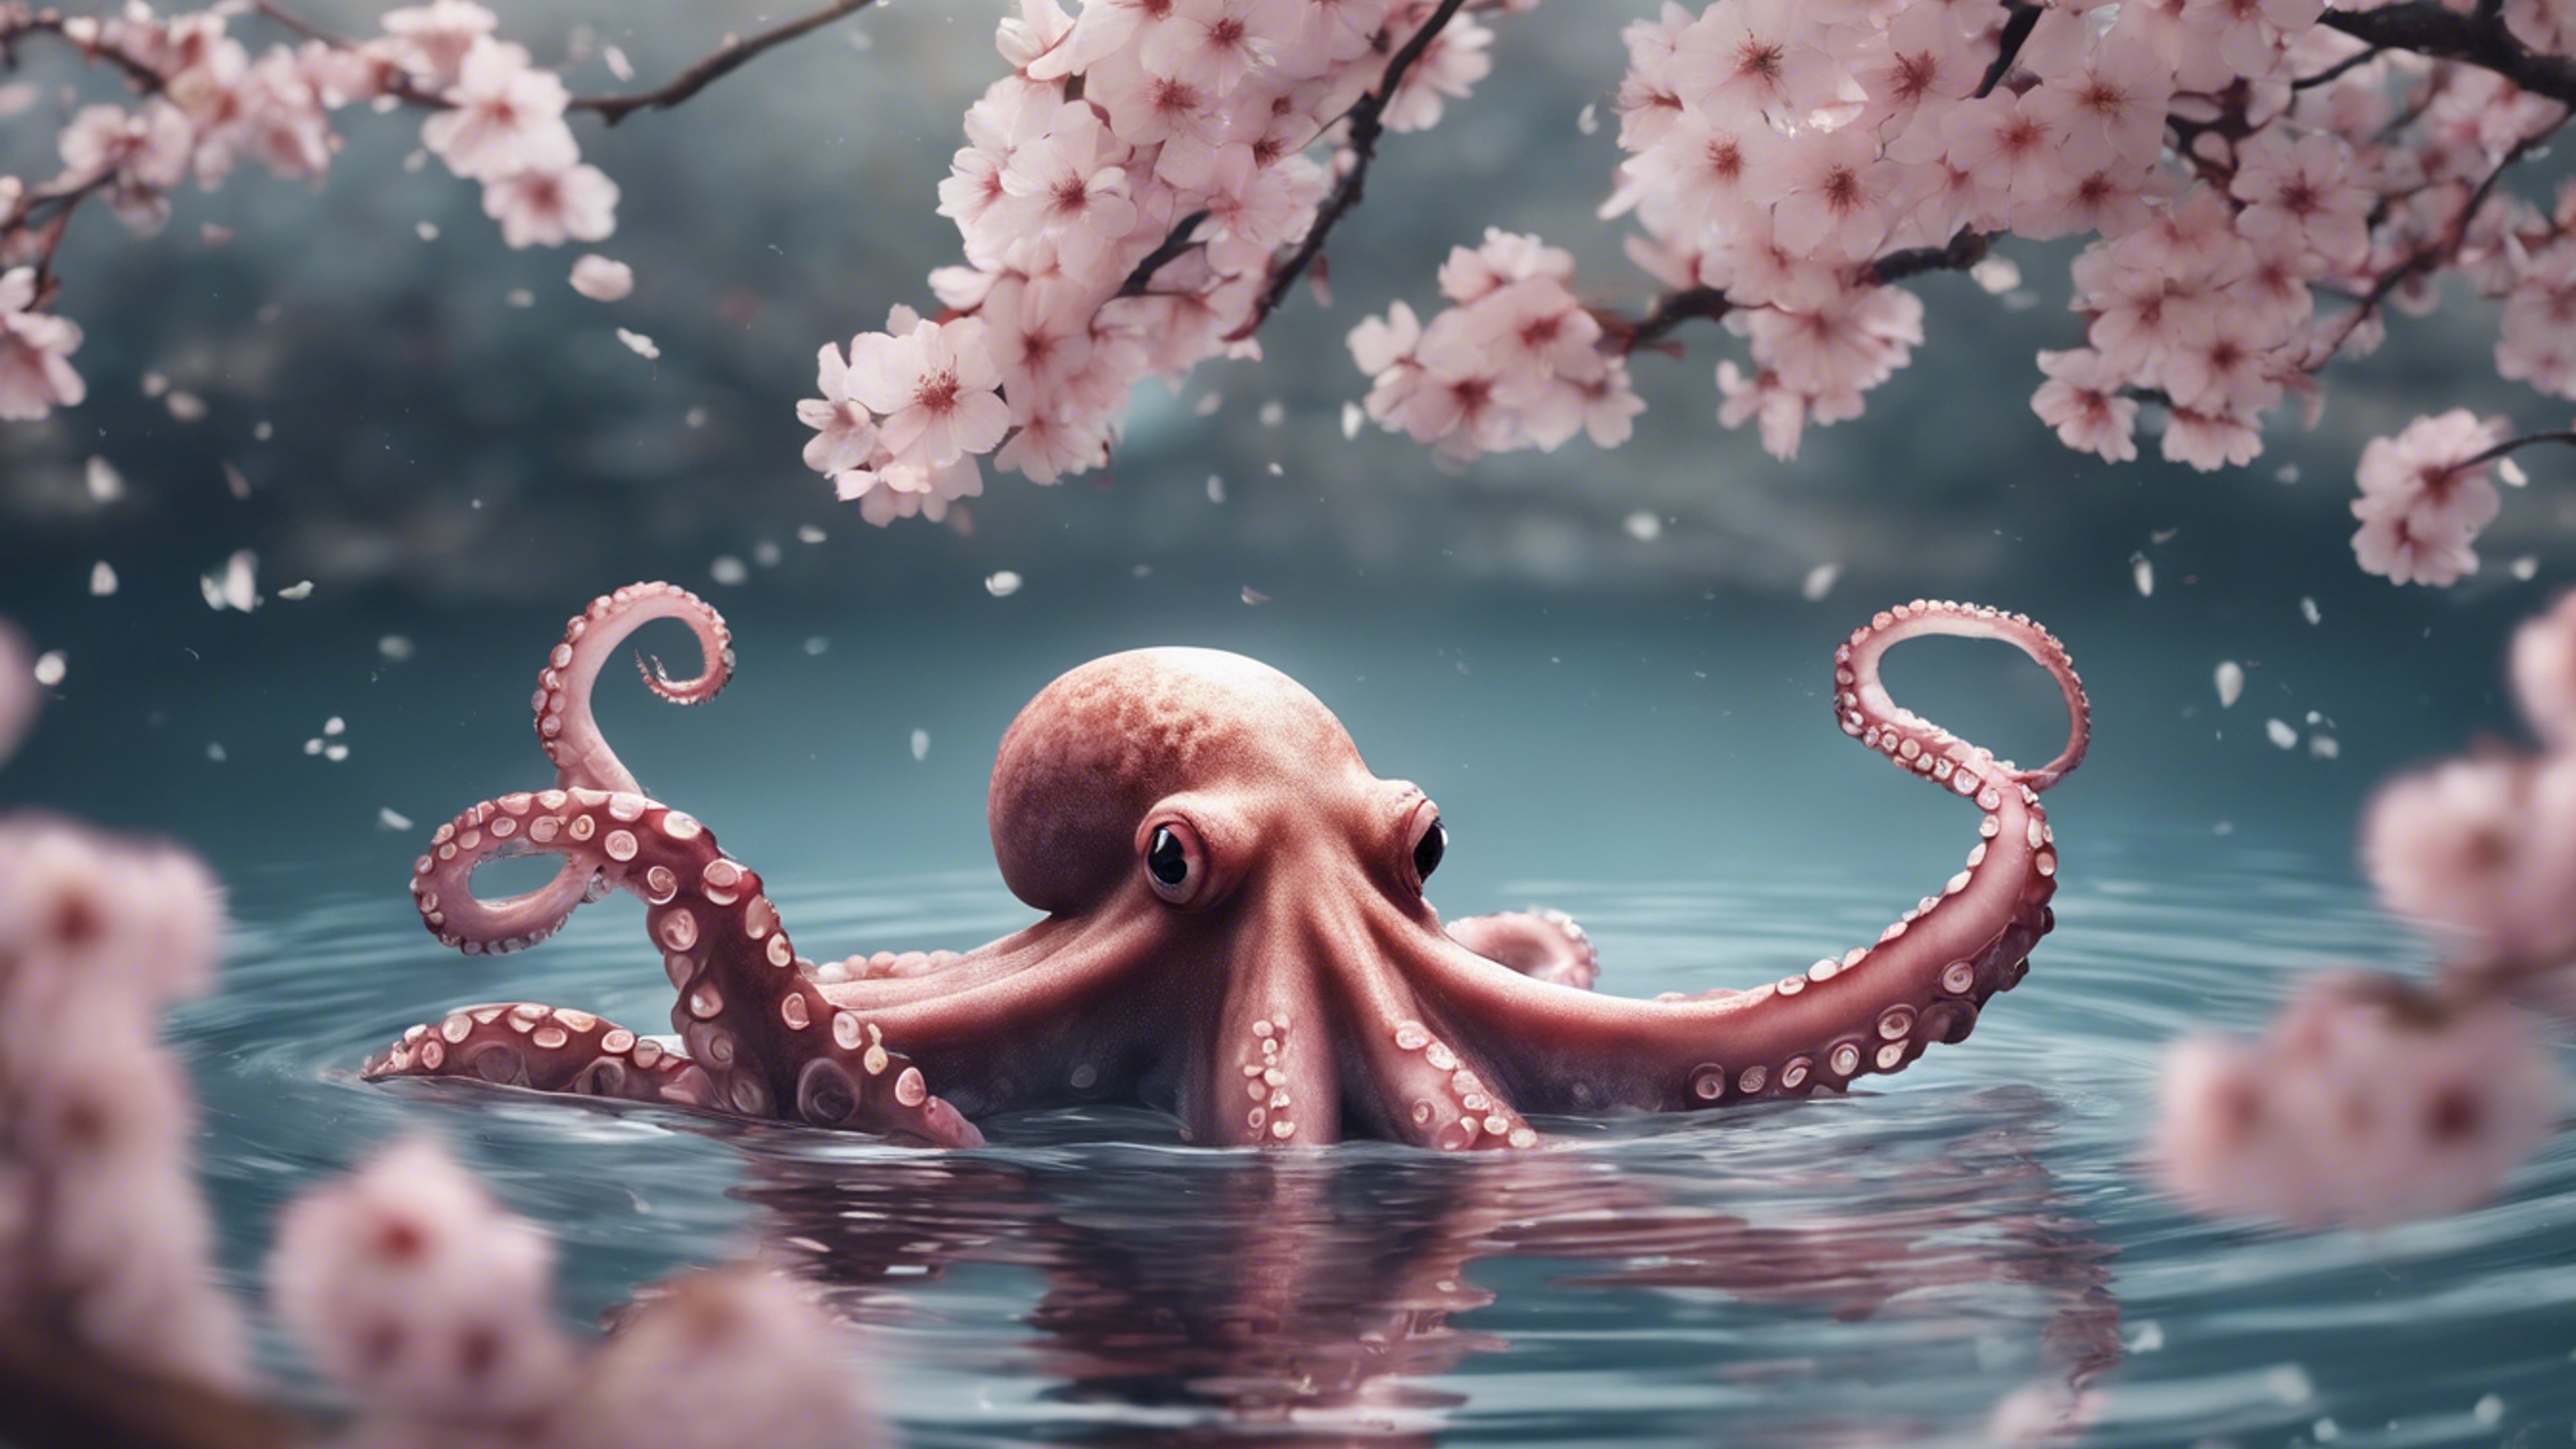 A sketch of an octopus floating peacefully in the water, with Japanese cherry blossoms gracefully falling around. Behang[a4f14d80ca6f4b538d98]